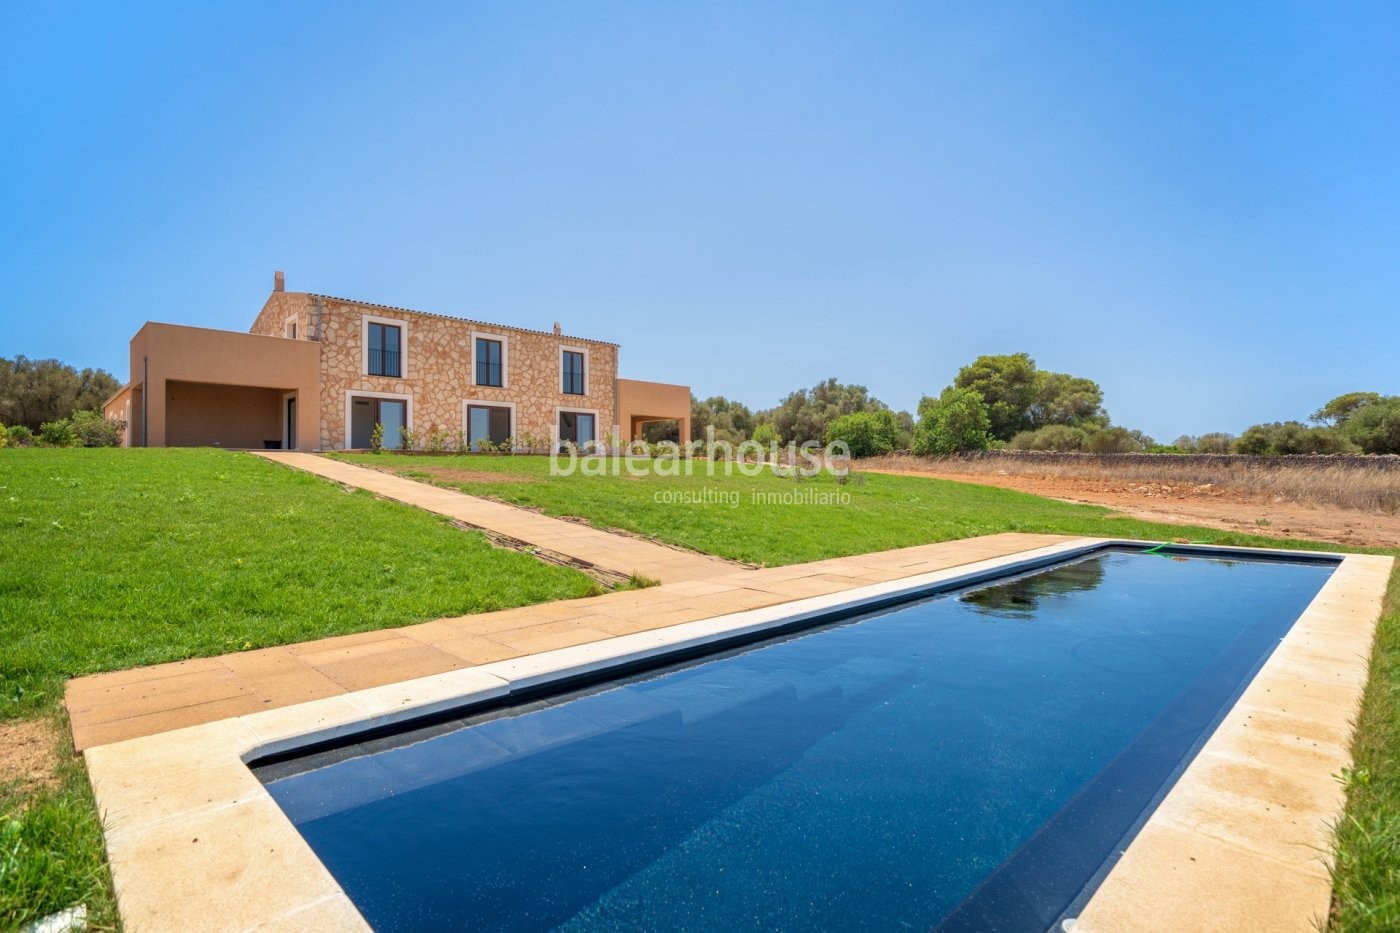 Large rustic farm of new construction in Santanyí, rural essence with modern spirit near beaches.